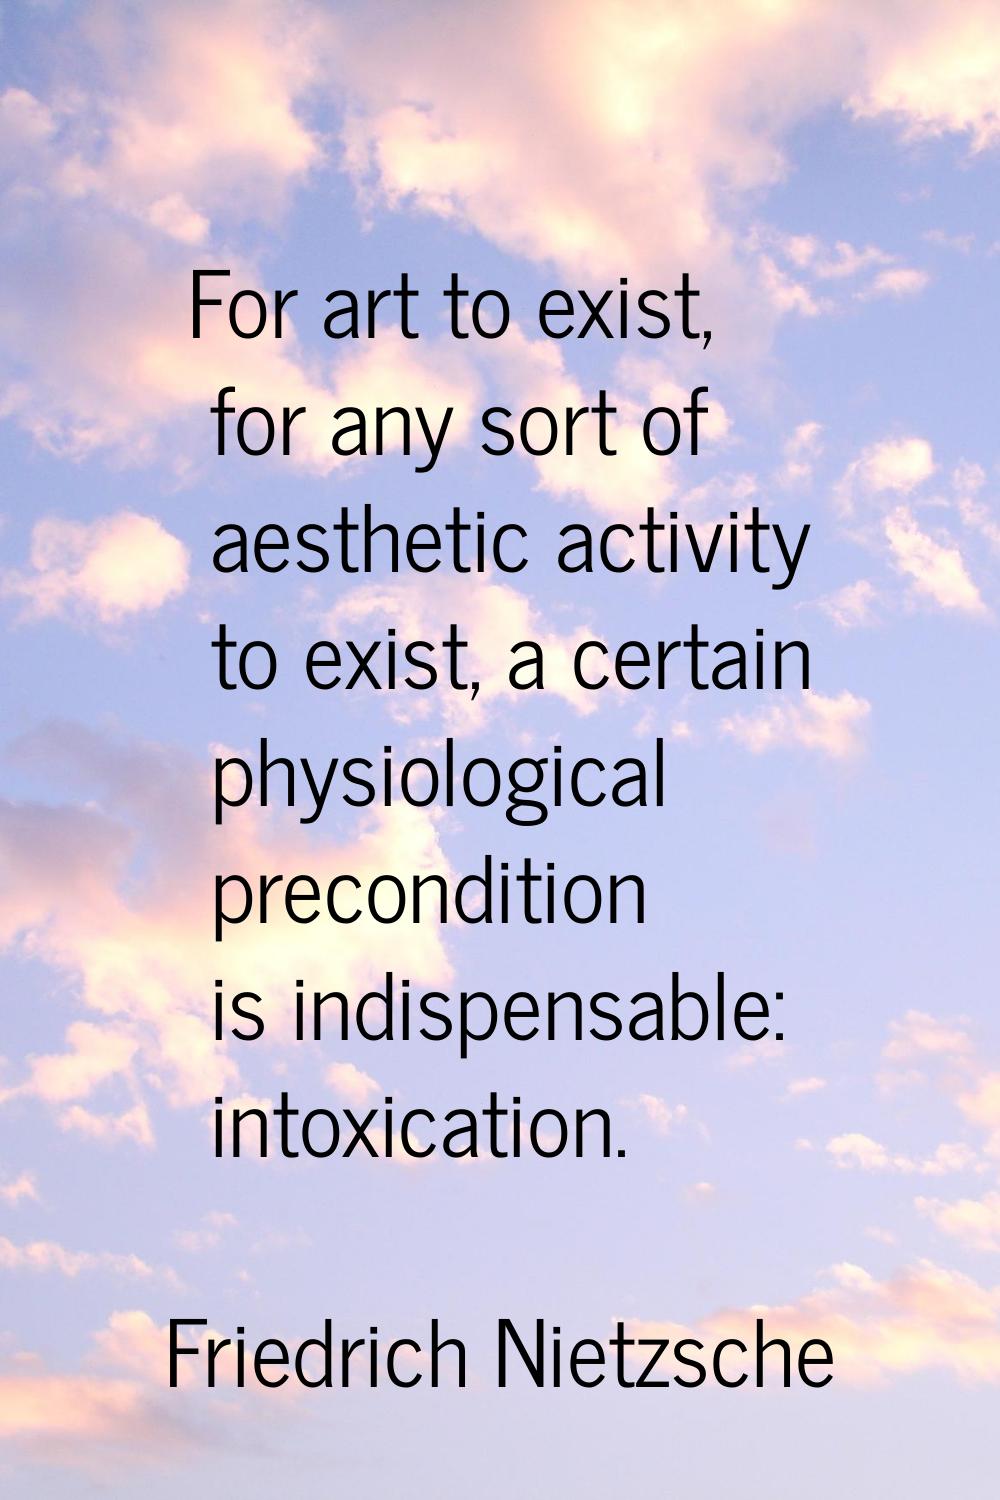 For art to exist, for any sort of aesthetic activity to exist, a certain physiological precondition